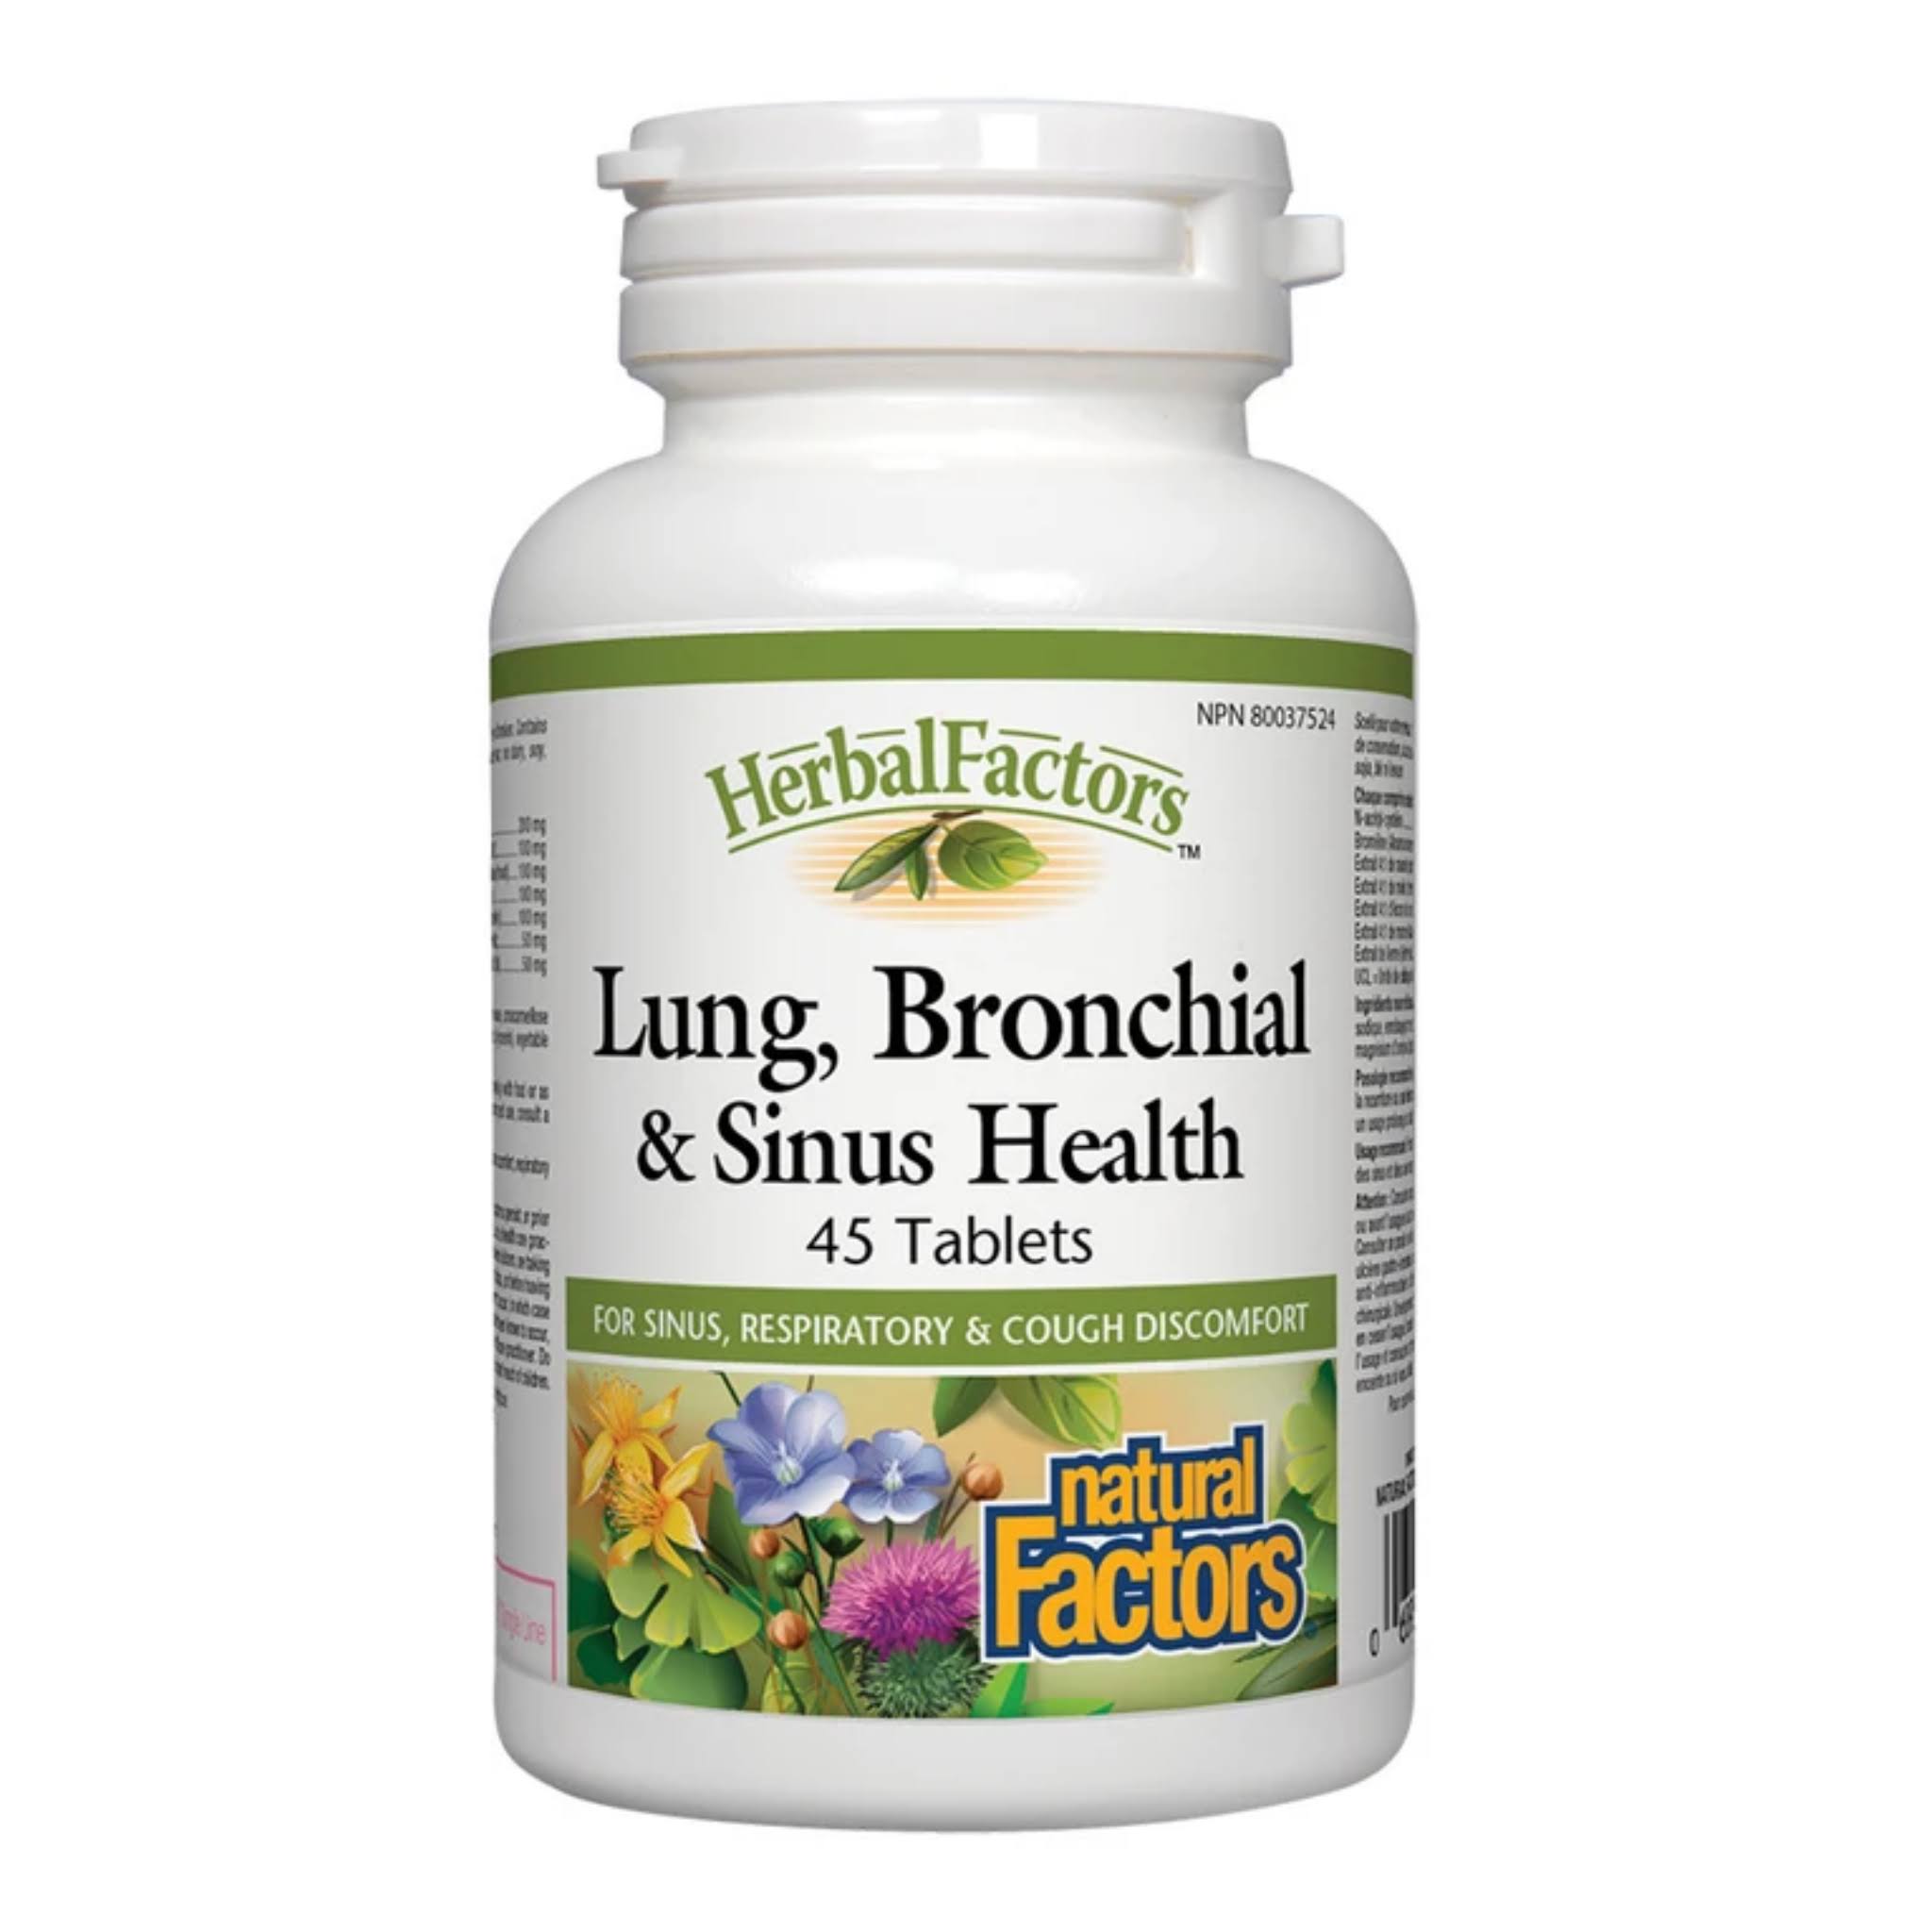 Natural Factors Lung Bronchial and Sinus Health Supplement - 45 Tablets